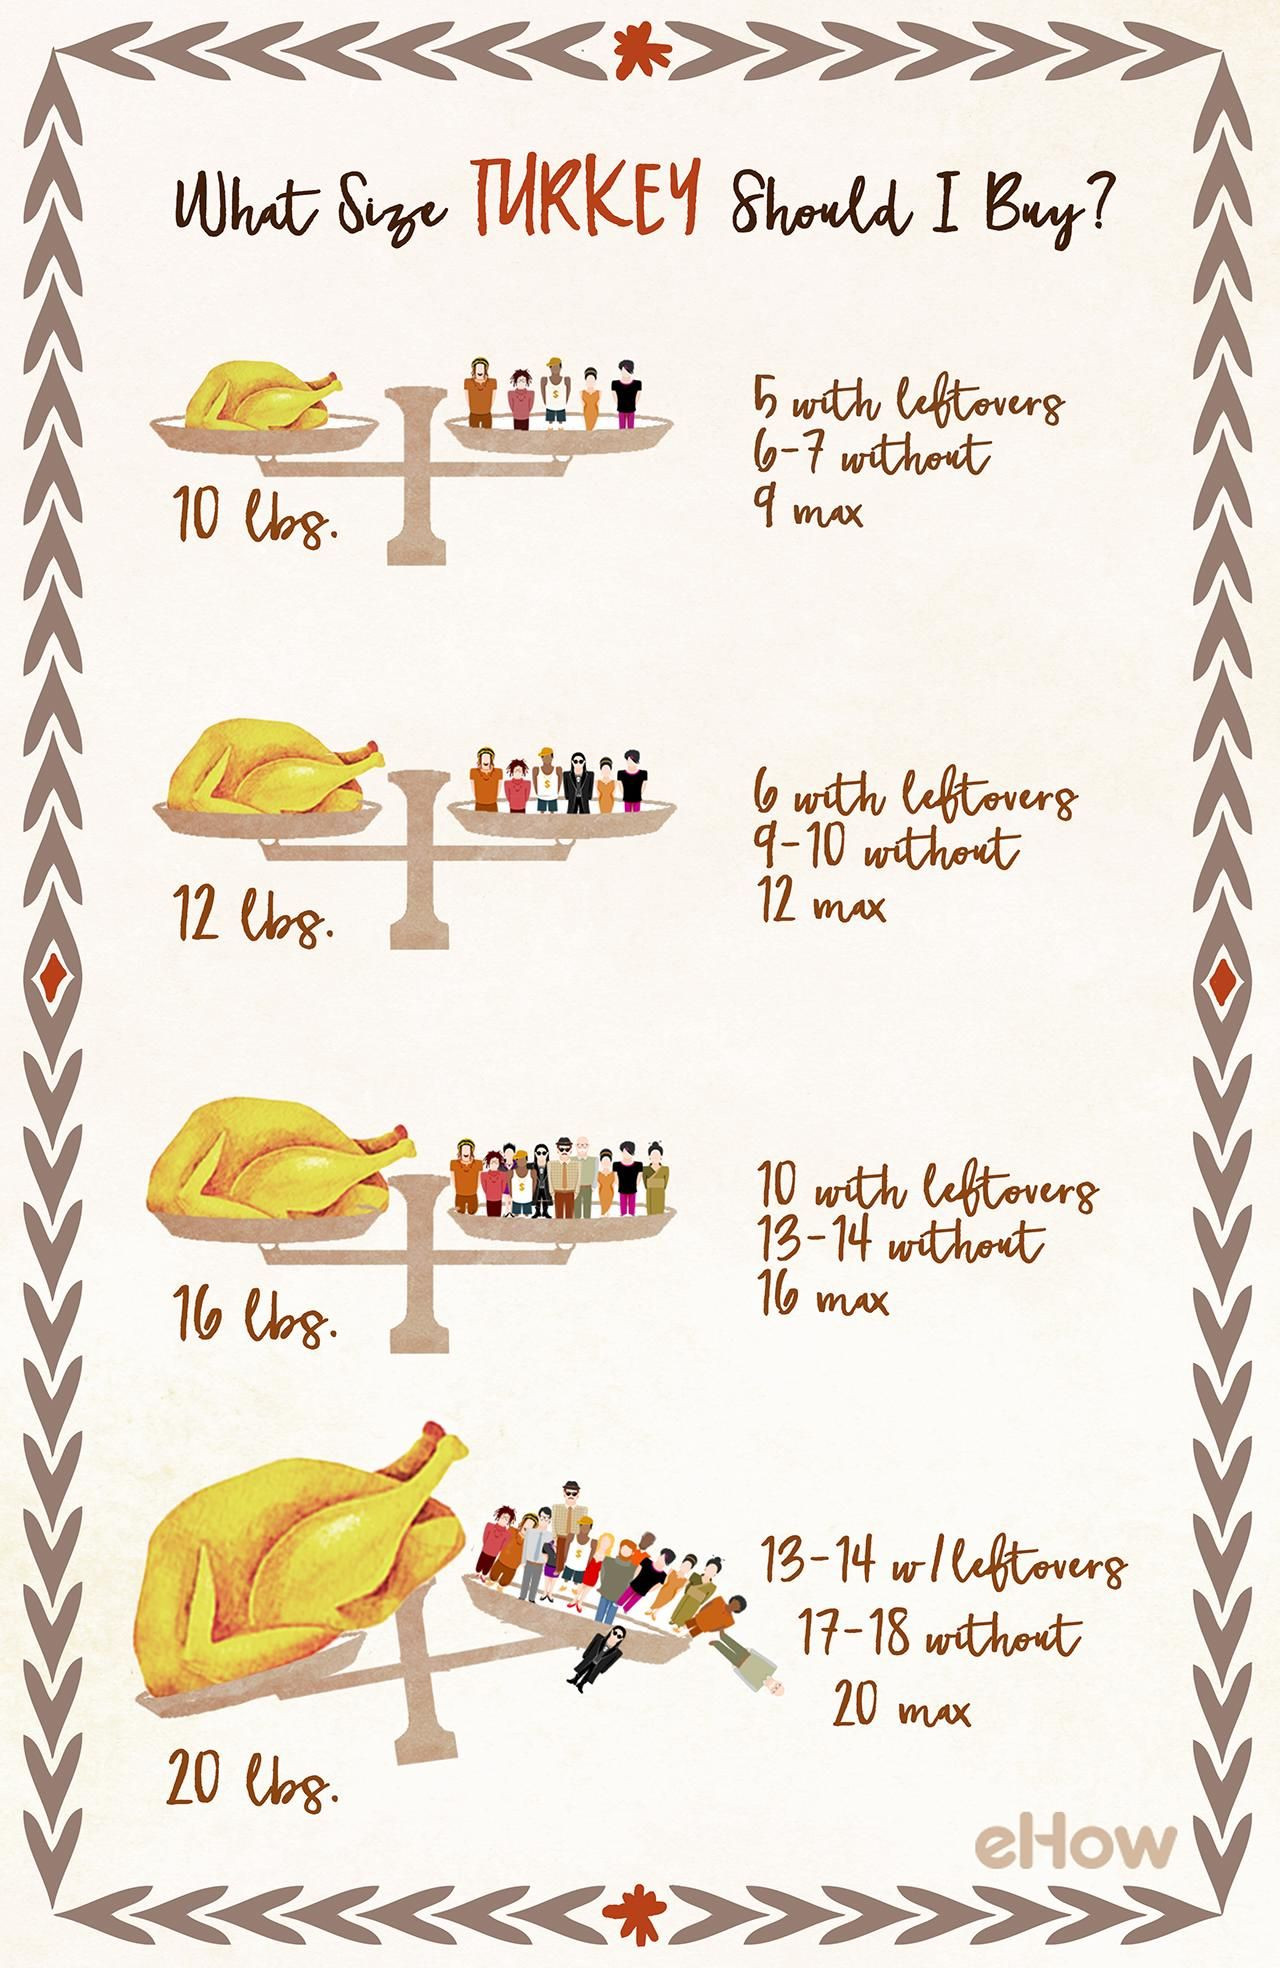 Buy A Cooked Turkey For Thanksgiving
 How to Figure Out What Size Turkey to Buy